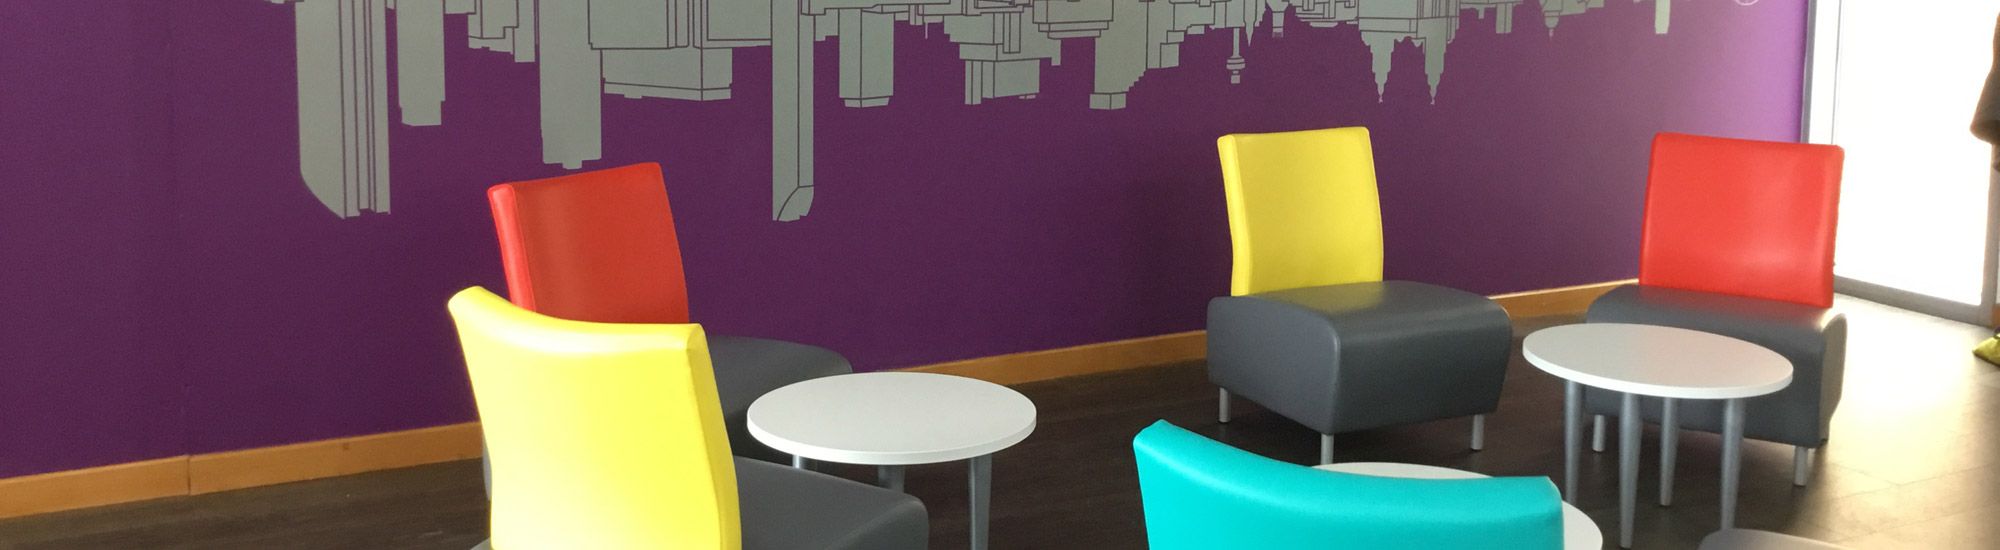 Break room with coloured chairs and tables